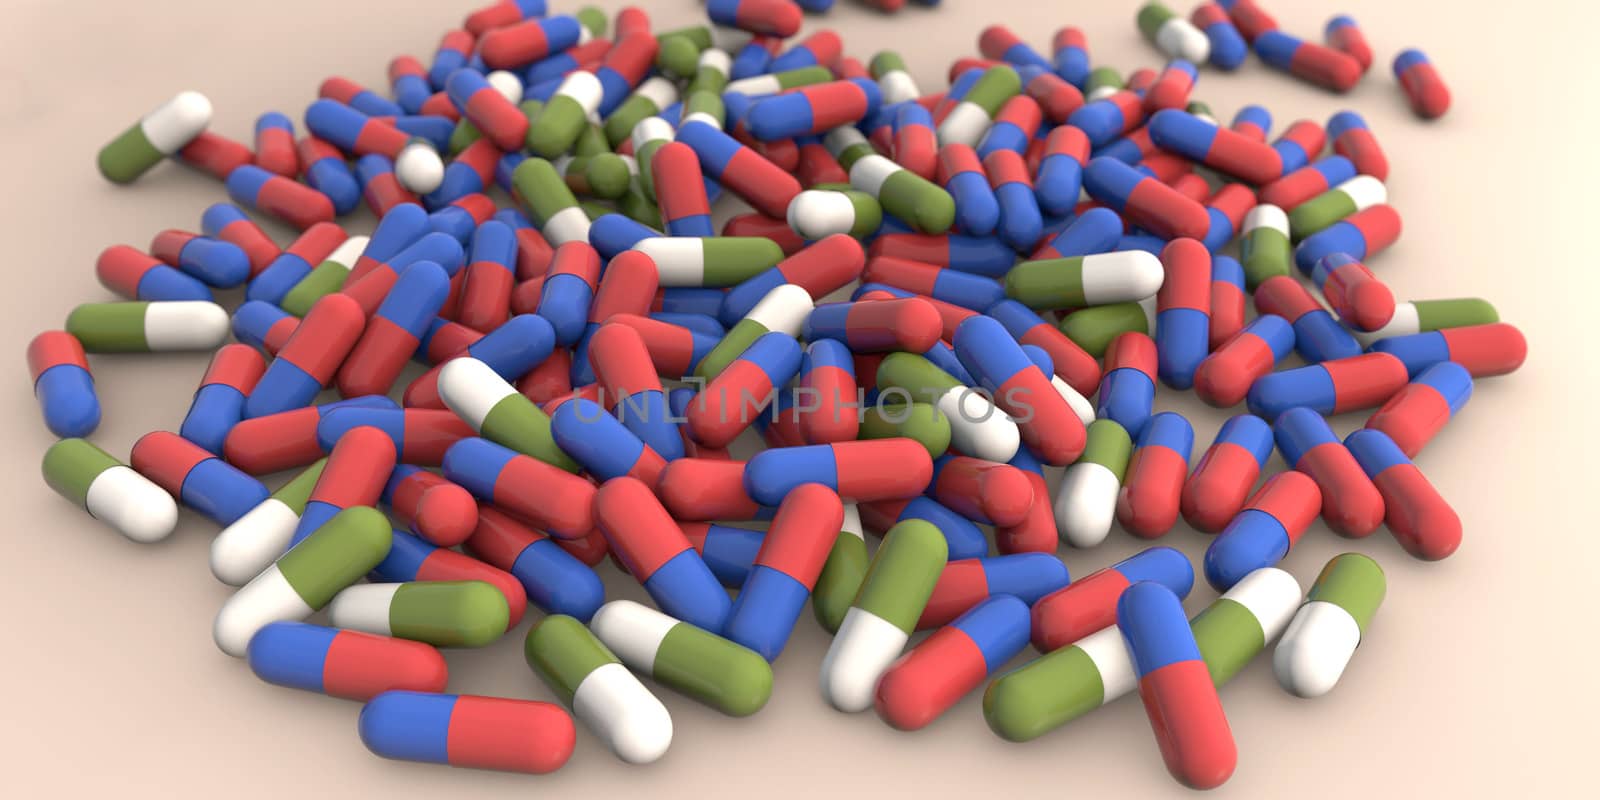 Scattered capsules background medical 3d rendered concept by F1b0nacci